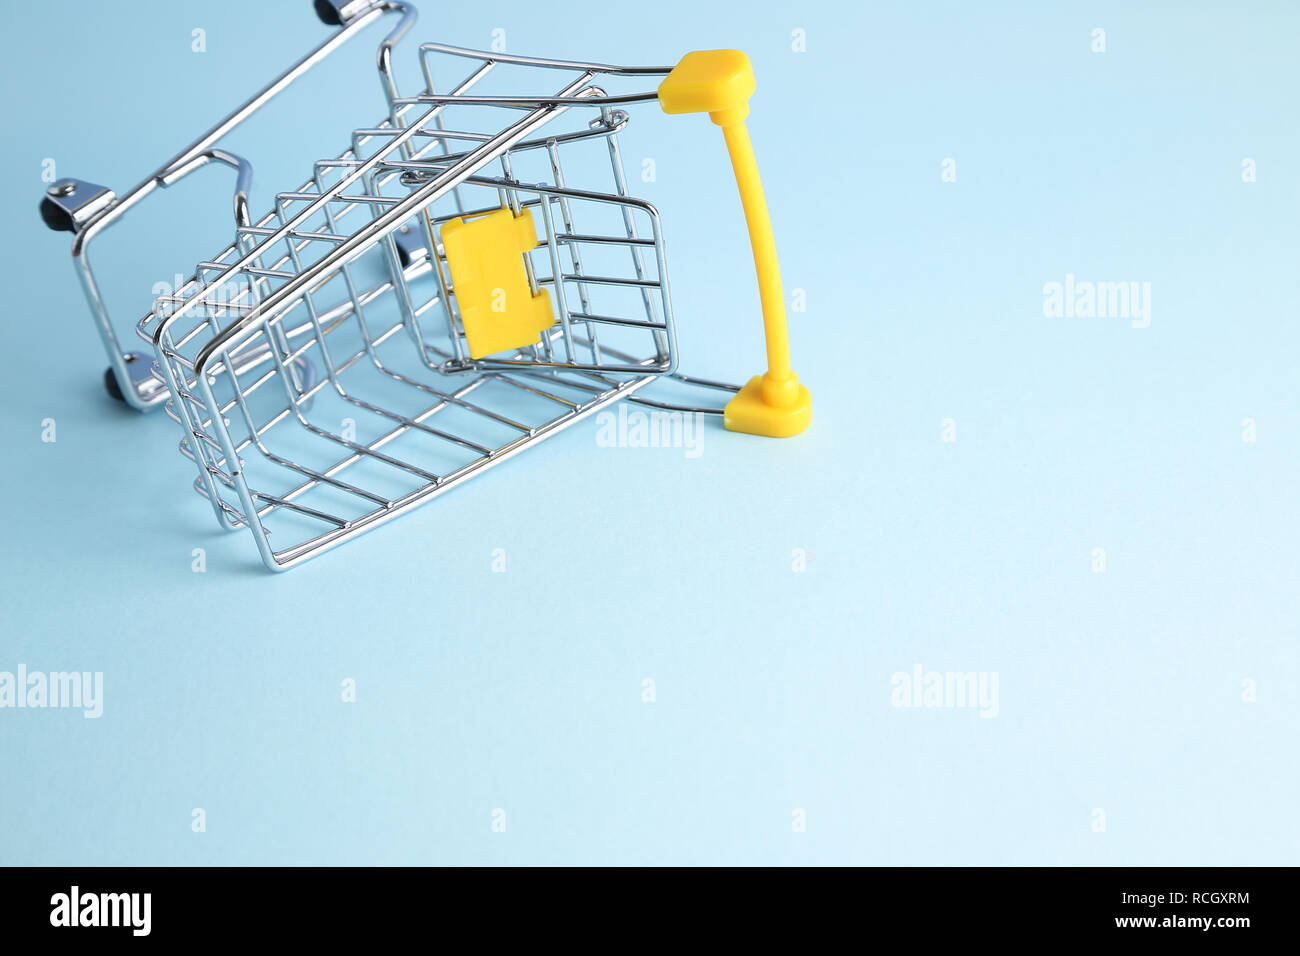 Shopping cart on blue background. Business concept Stock Photo